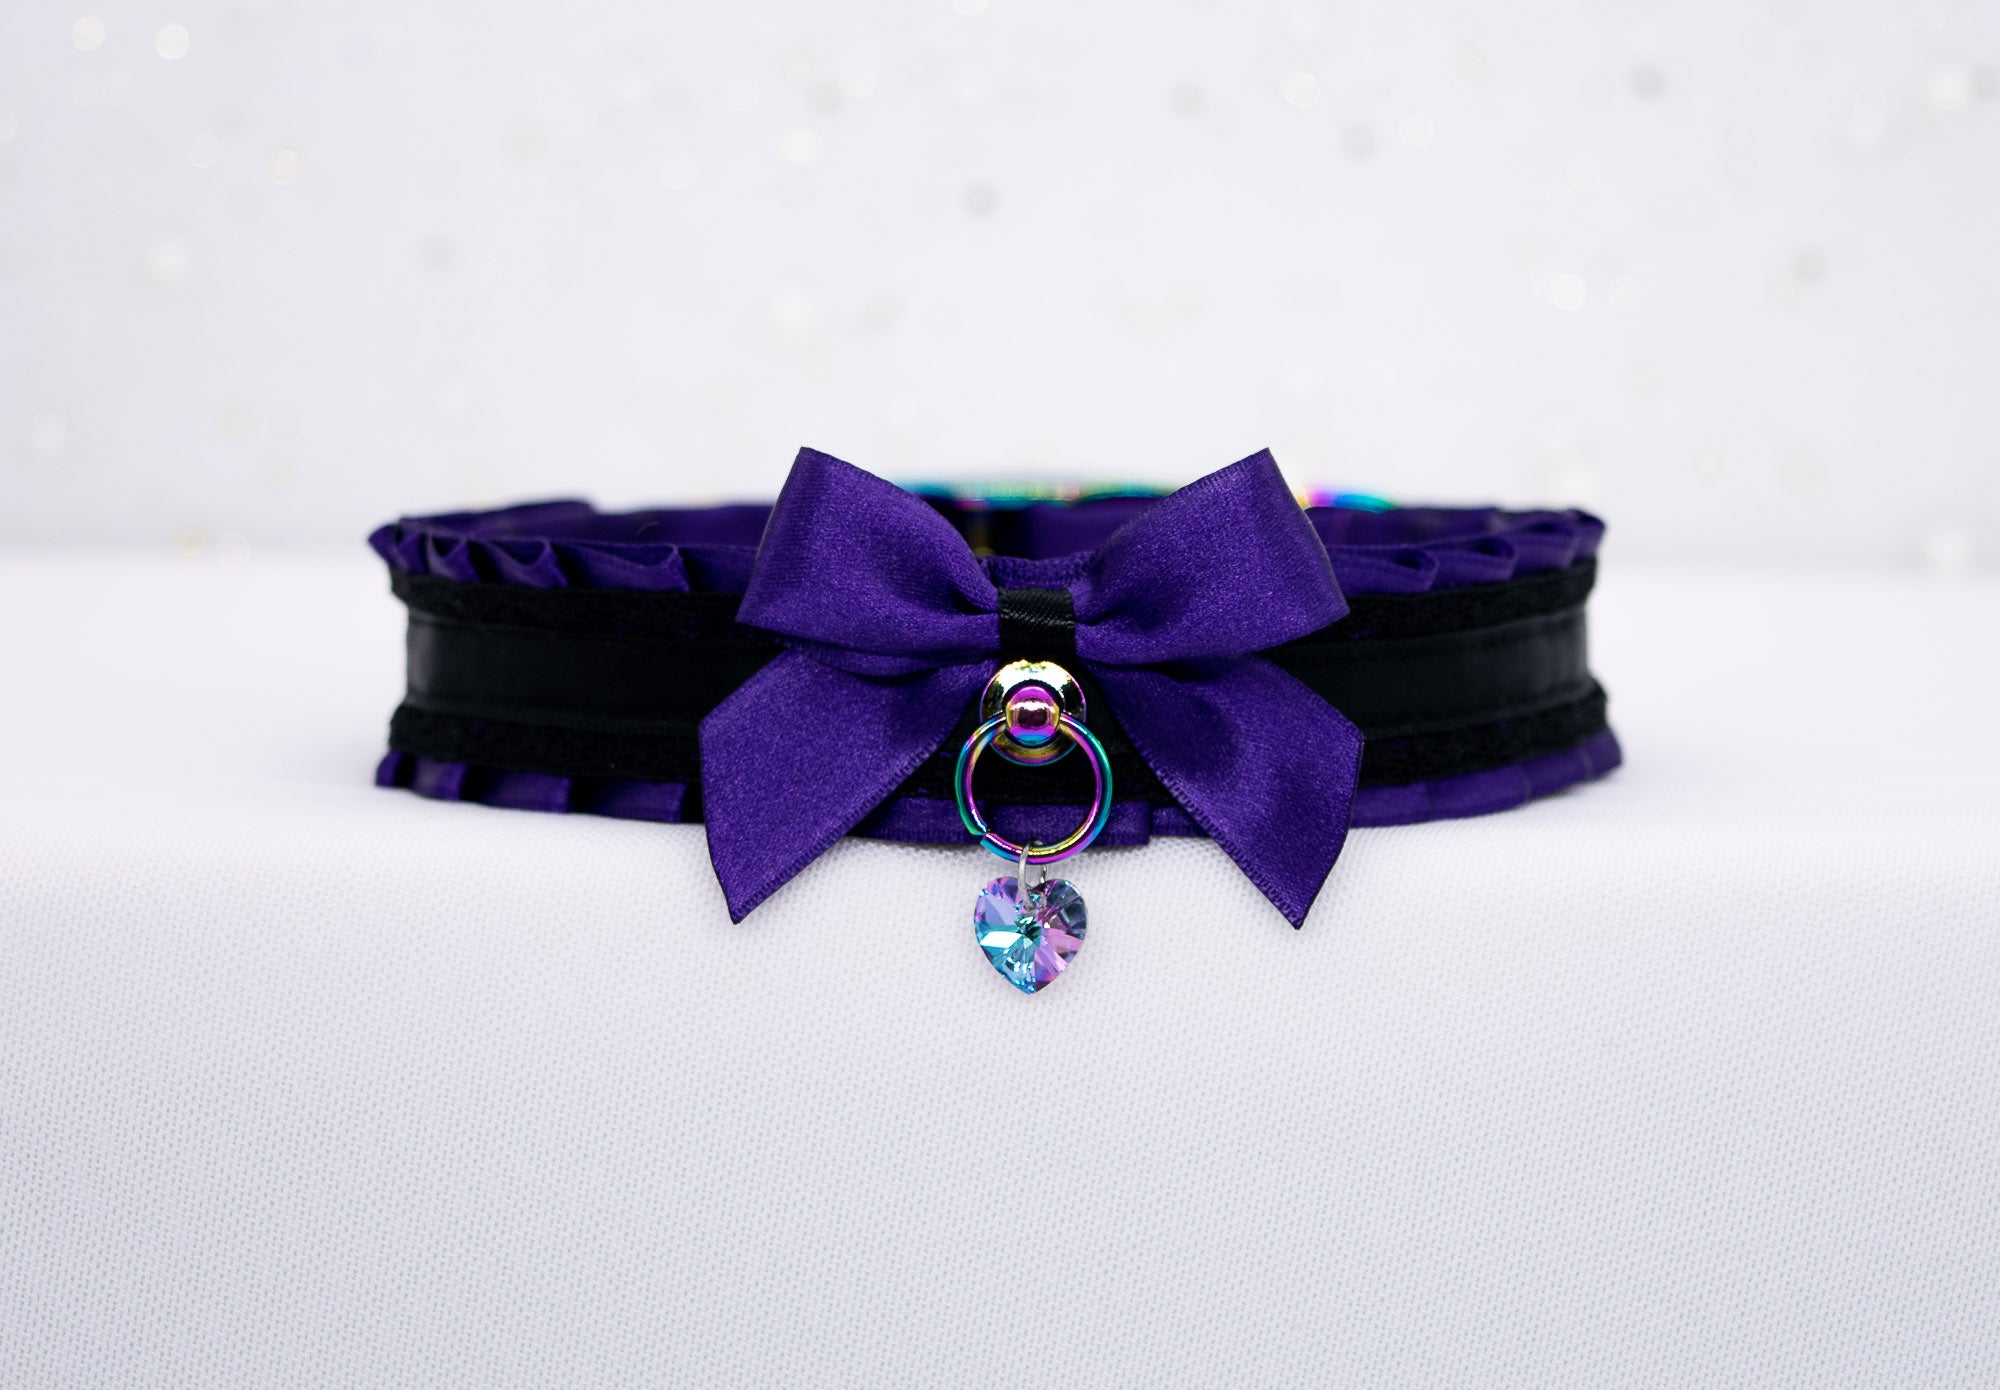 Regal Purple and Black Lace BDSM Collar in Rainbow